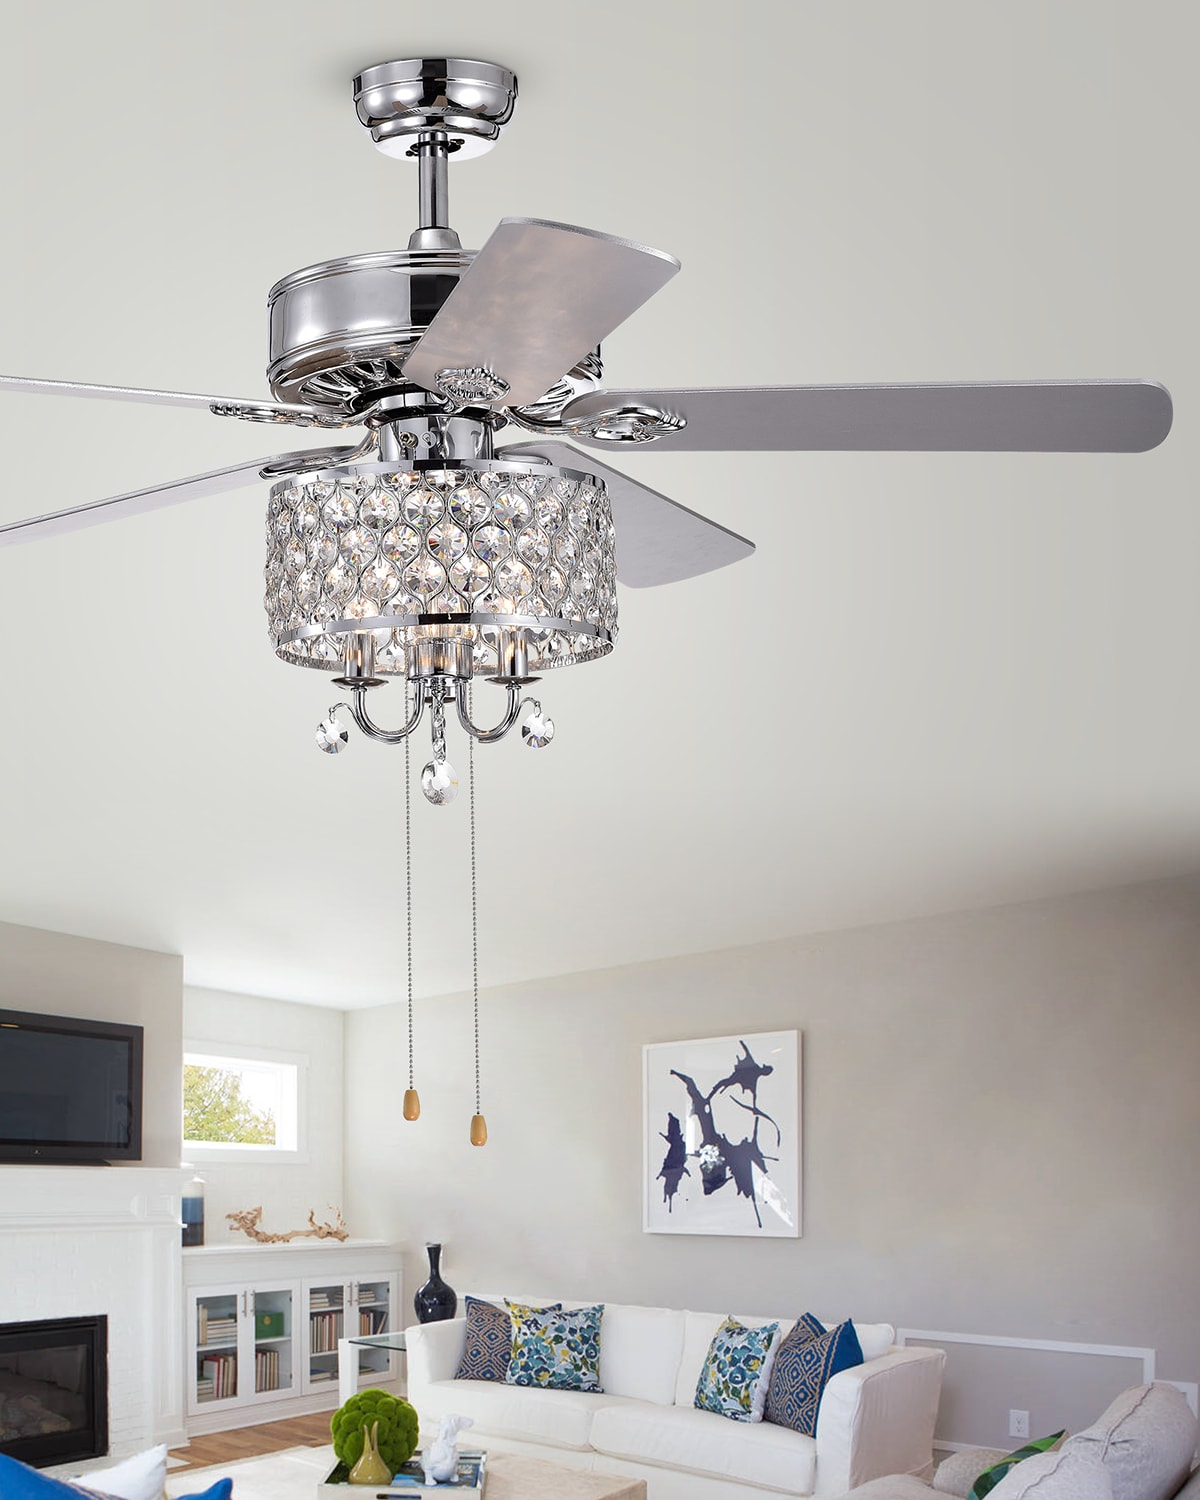 Home Accessories Round Crystal Chandelier Ceiling Fan In Metallic